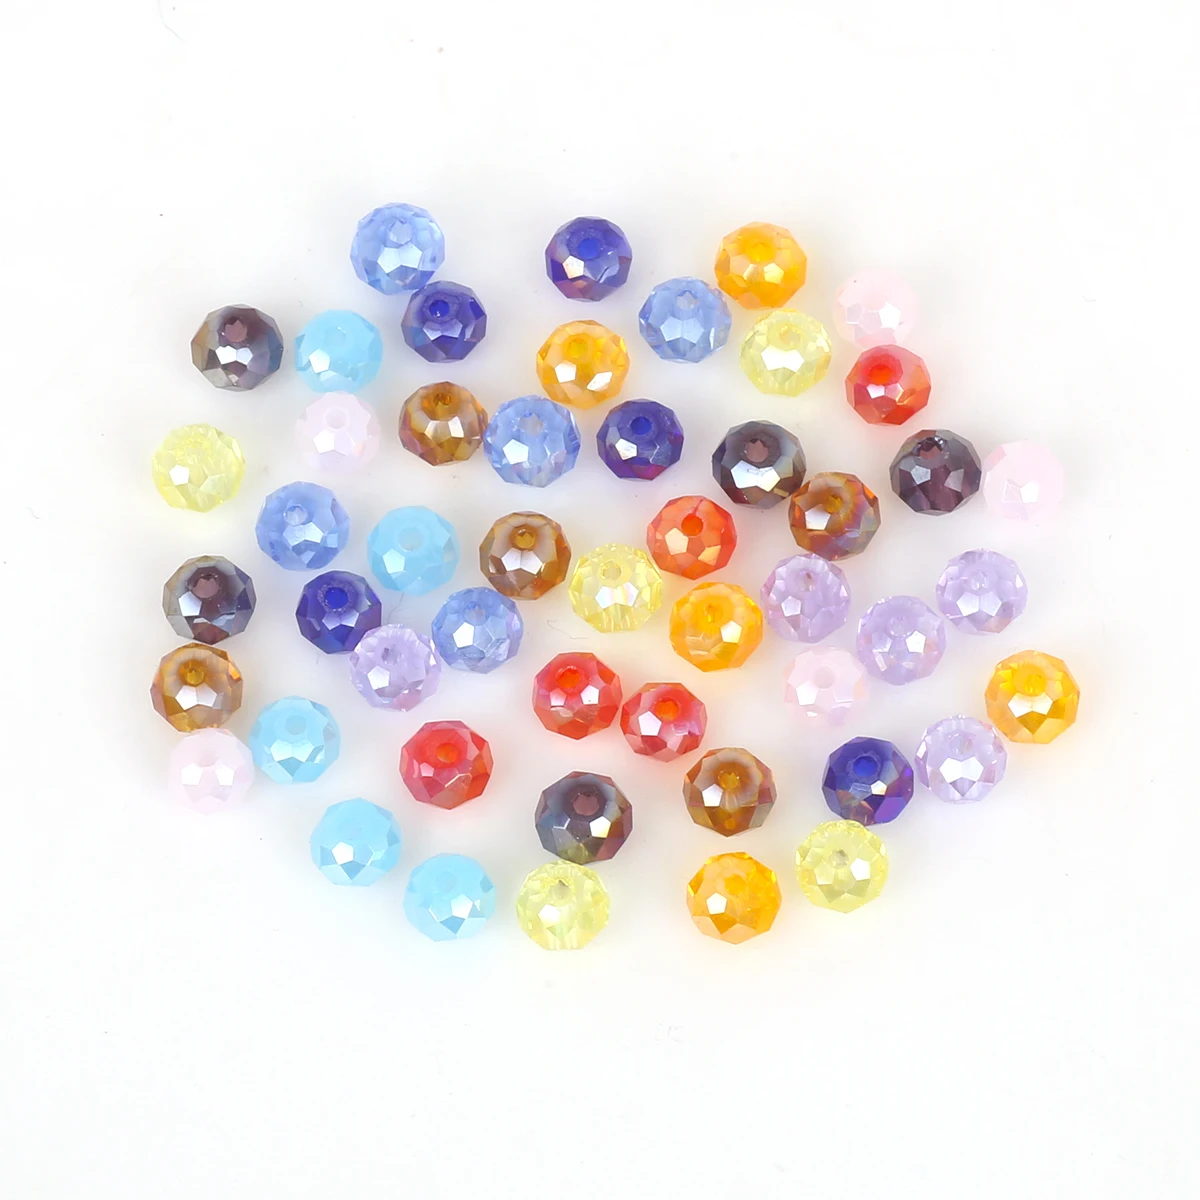 

2mm 3mm 4mm 6mm 8mm Rondelle Austria Crystal Beads Faceted Glass Beads Loose Spacer Beads For DIY Bracelet Jewelry Making